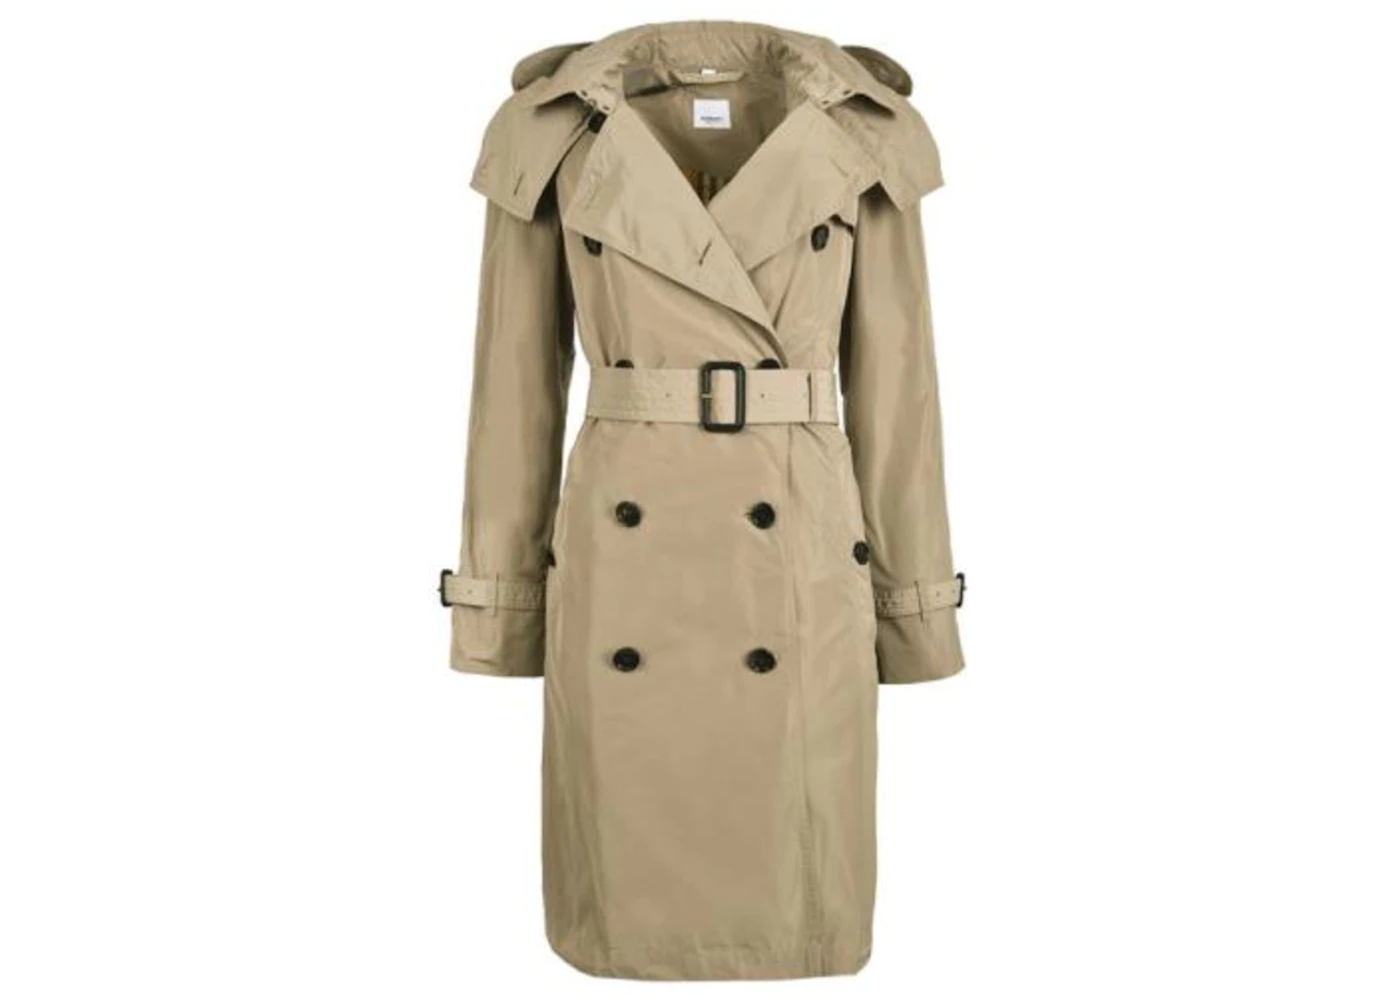 Burberry Women's Amberford Trench Coat Beige - US